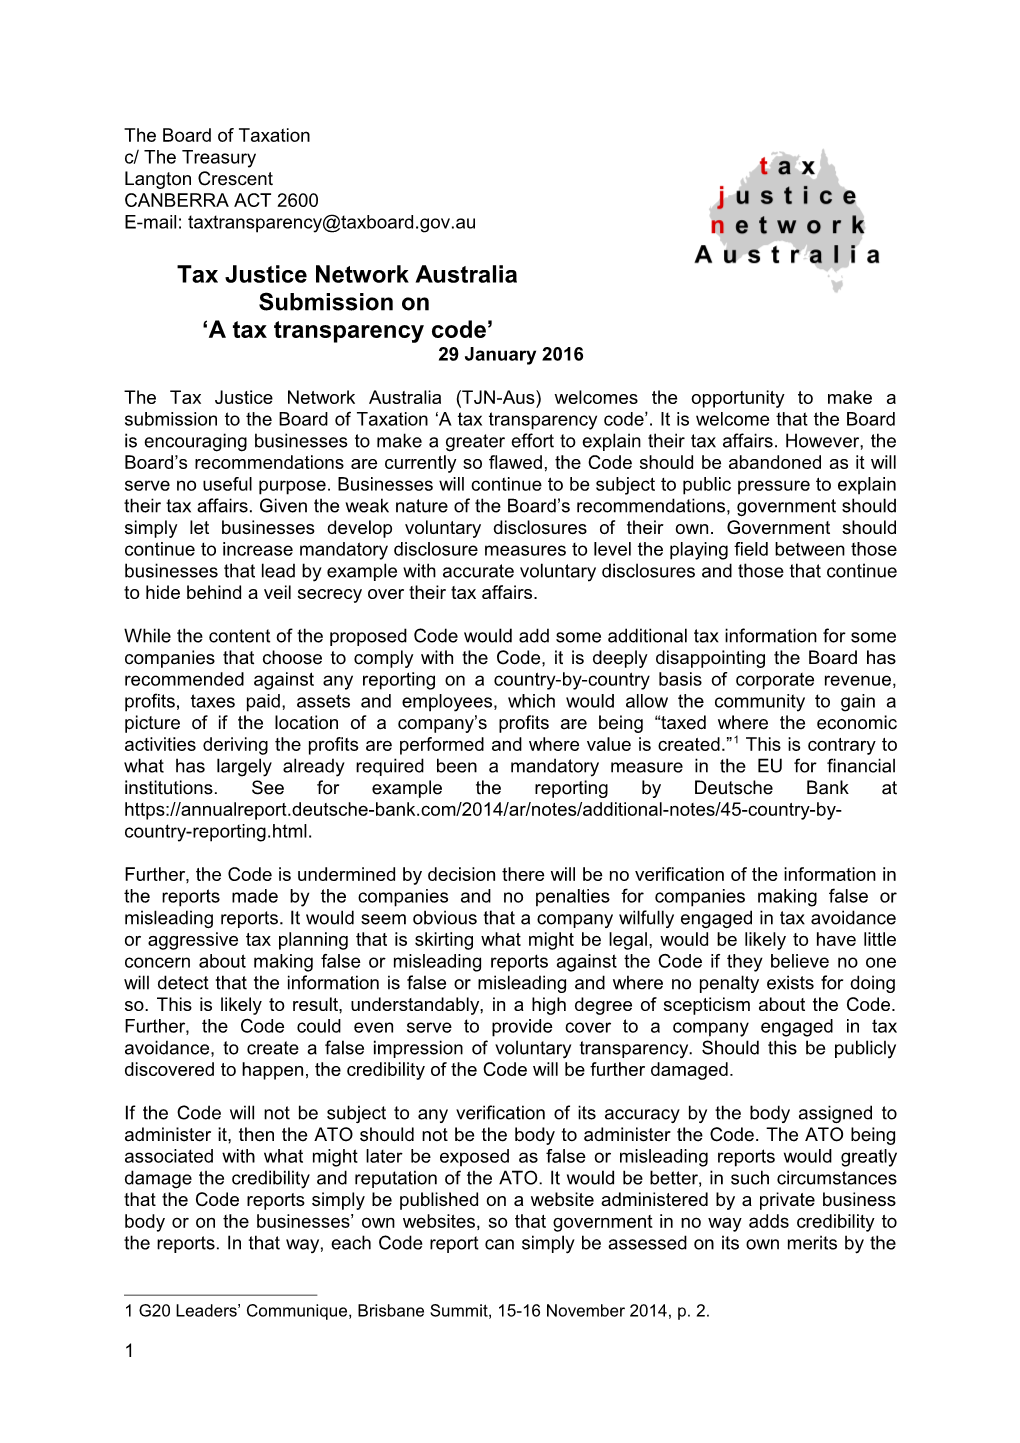 Tax Justice Network Australia - Submission: Consultation Paper on the Voluntary Tax Transparency